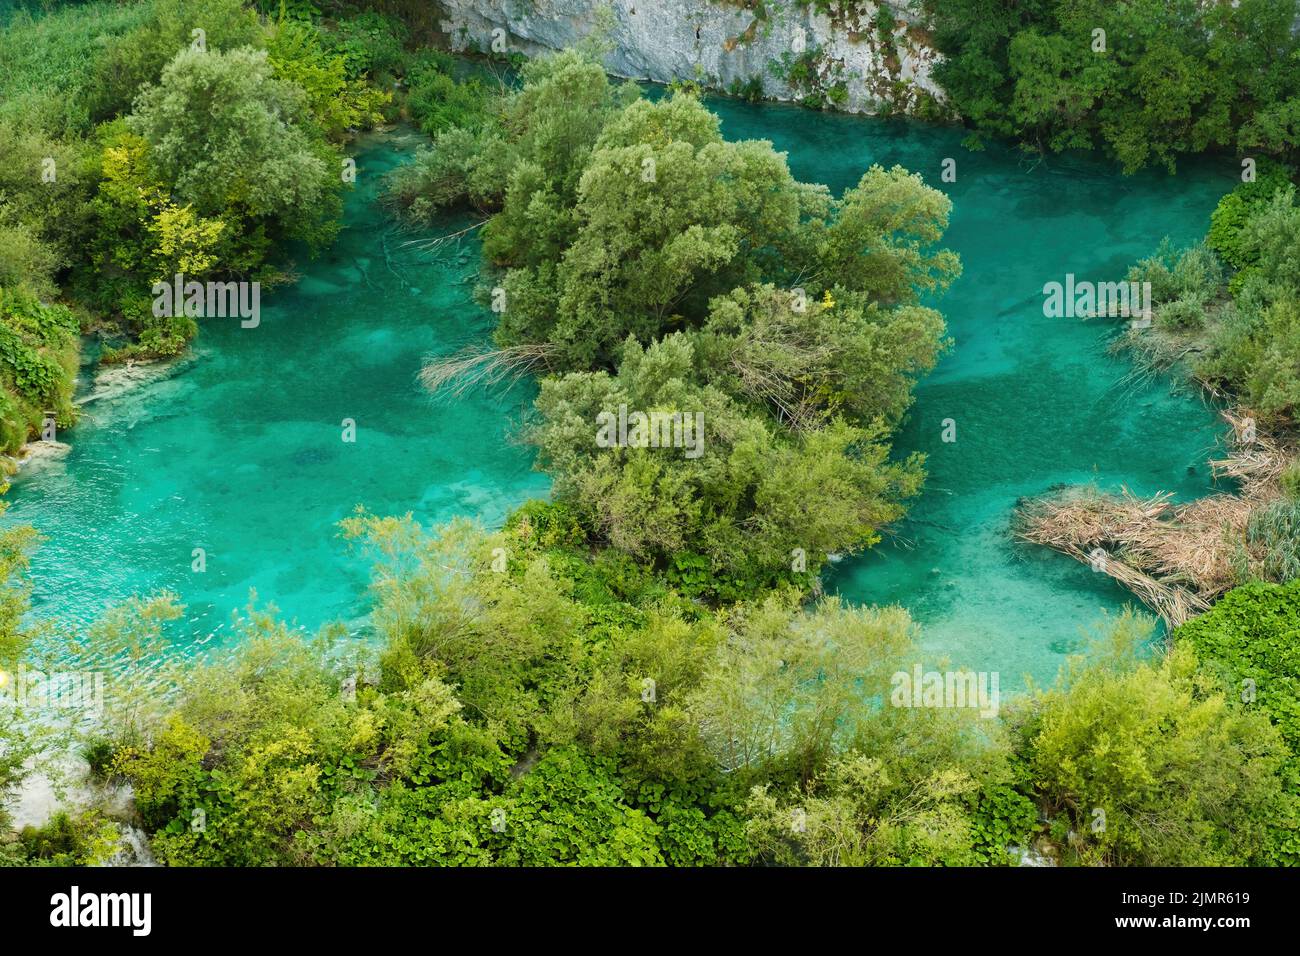 Small green islands among turquoise-colored transparent water of lake surrounded by mountains. Breathtaking landscape of natural reserve on Plitvice lakes upper view Stock Photo